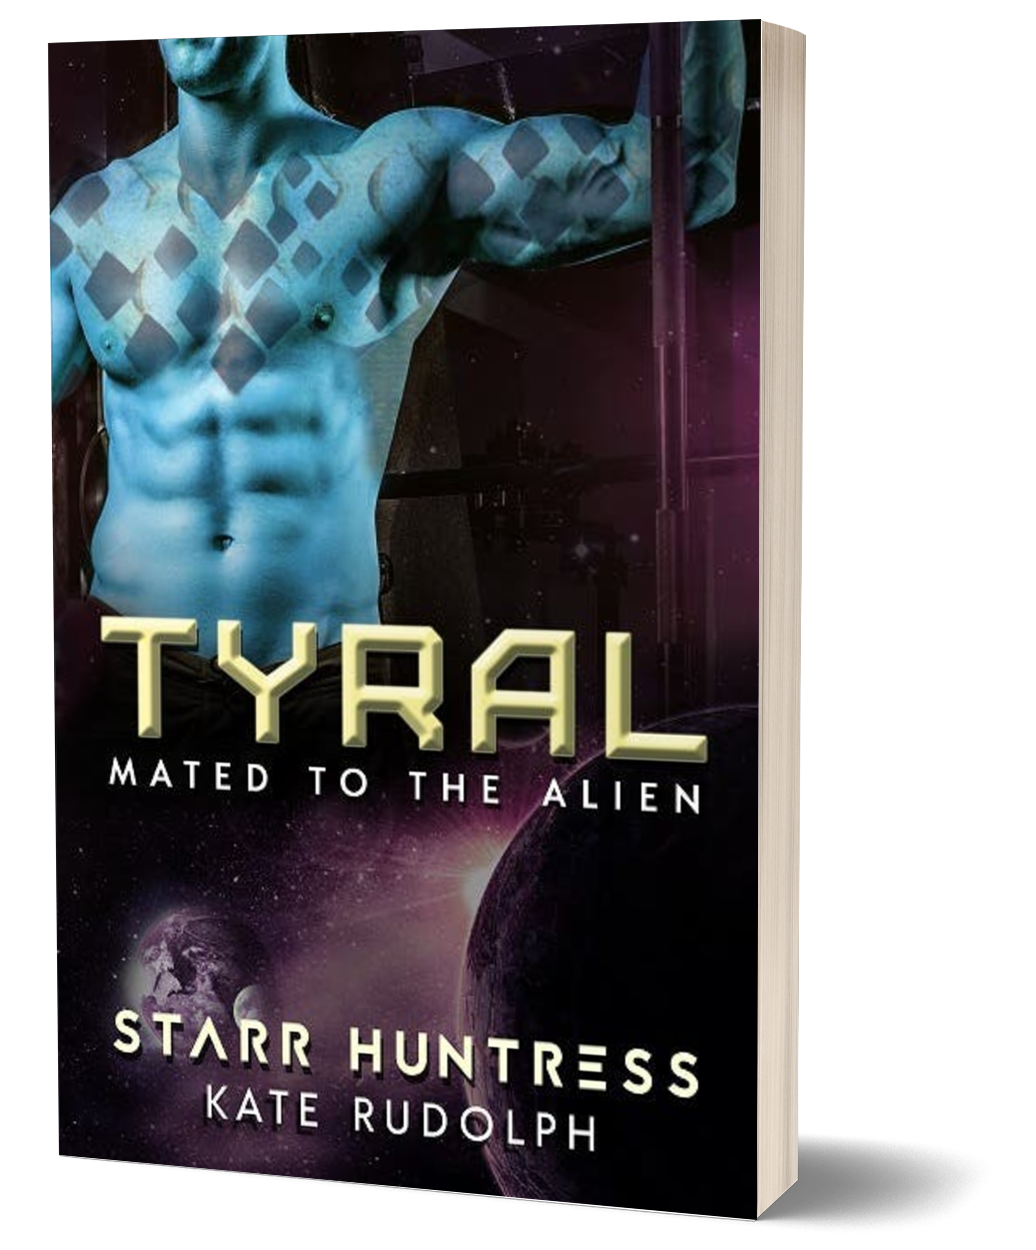 Mated to the Alien Volume One Paperback Bundle